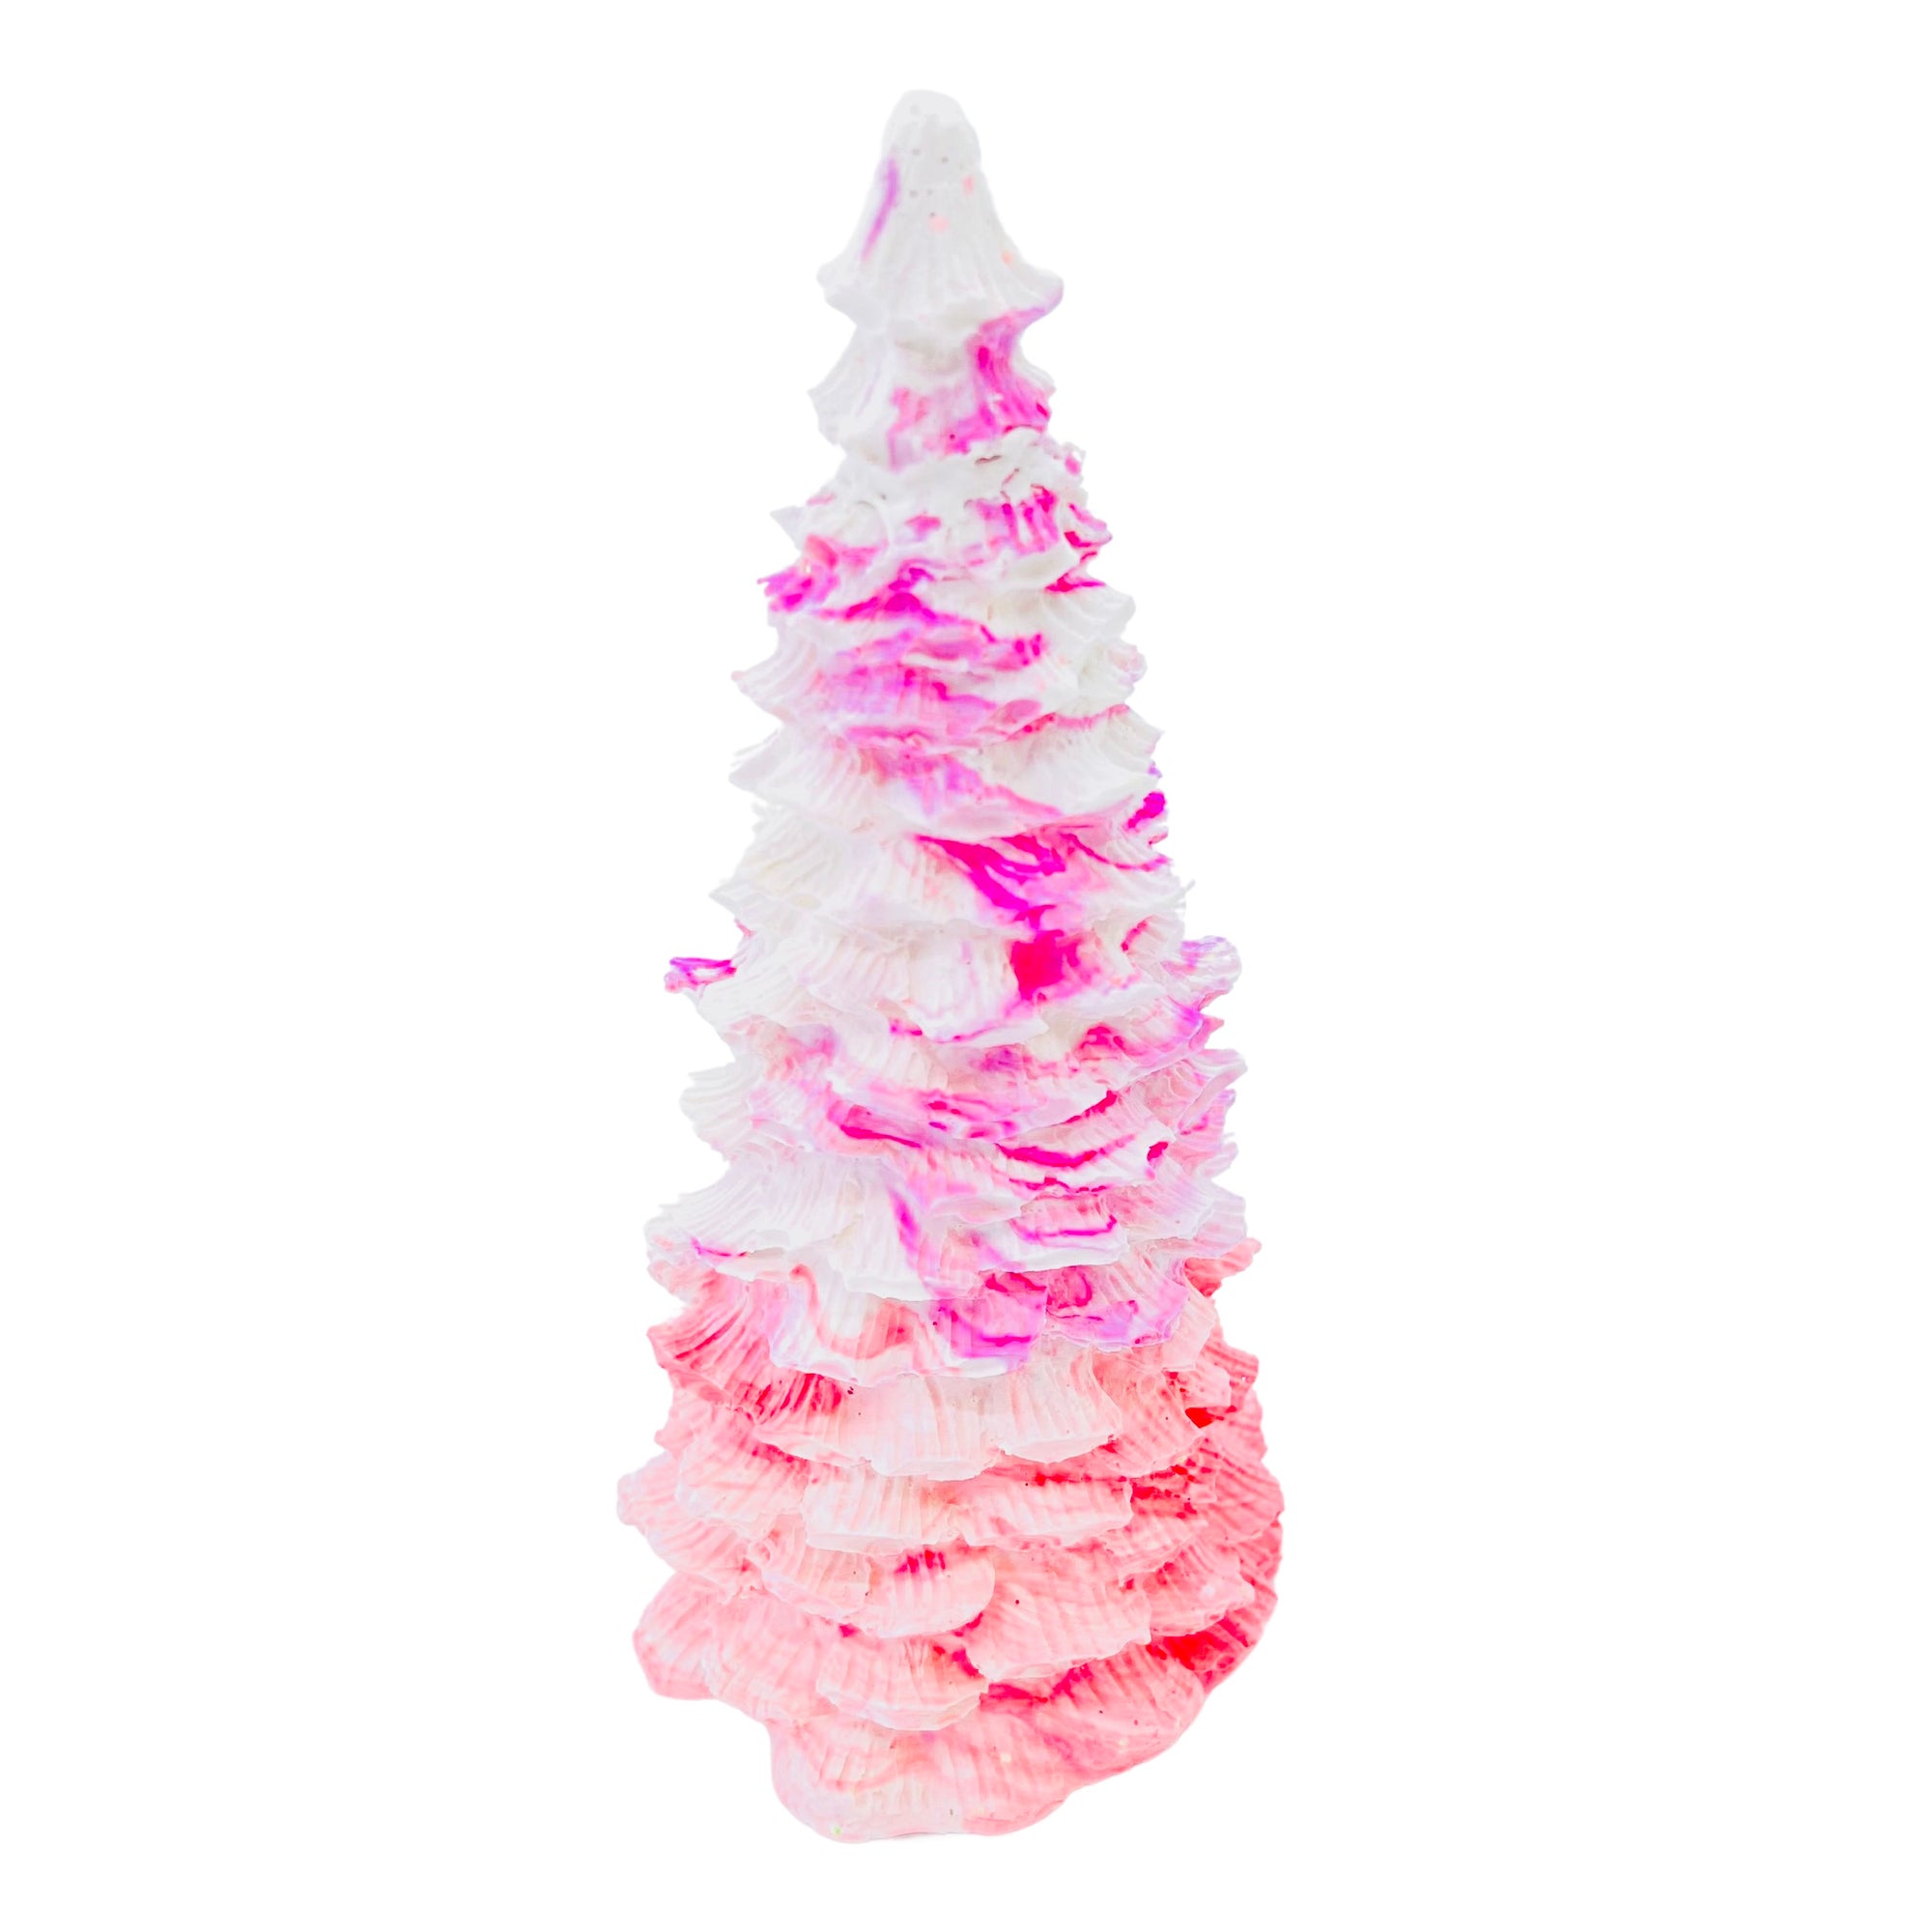 This tall Jesmonite Christmas tree measures 13.5cm in height and has been marbled with magenta and red pigment.